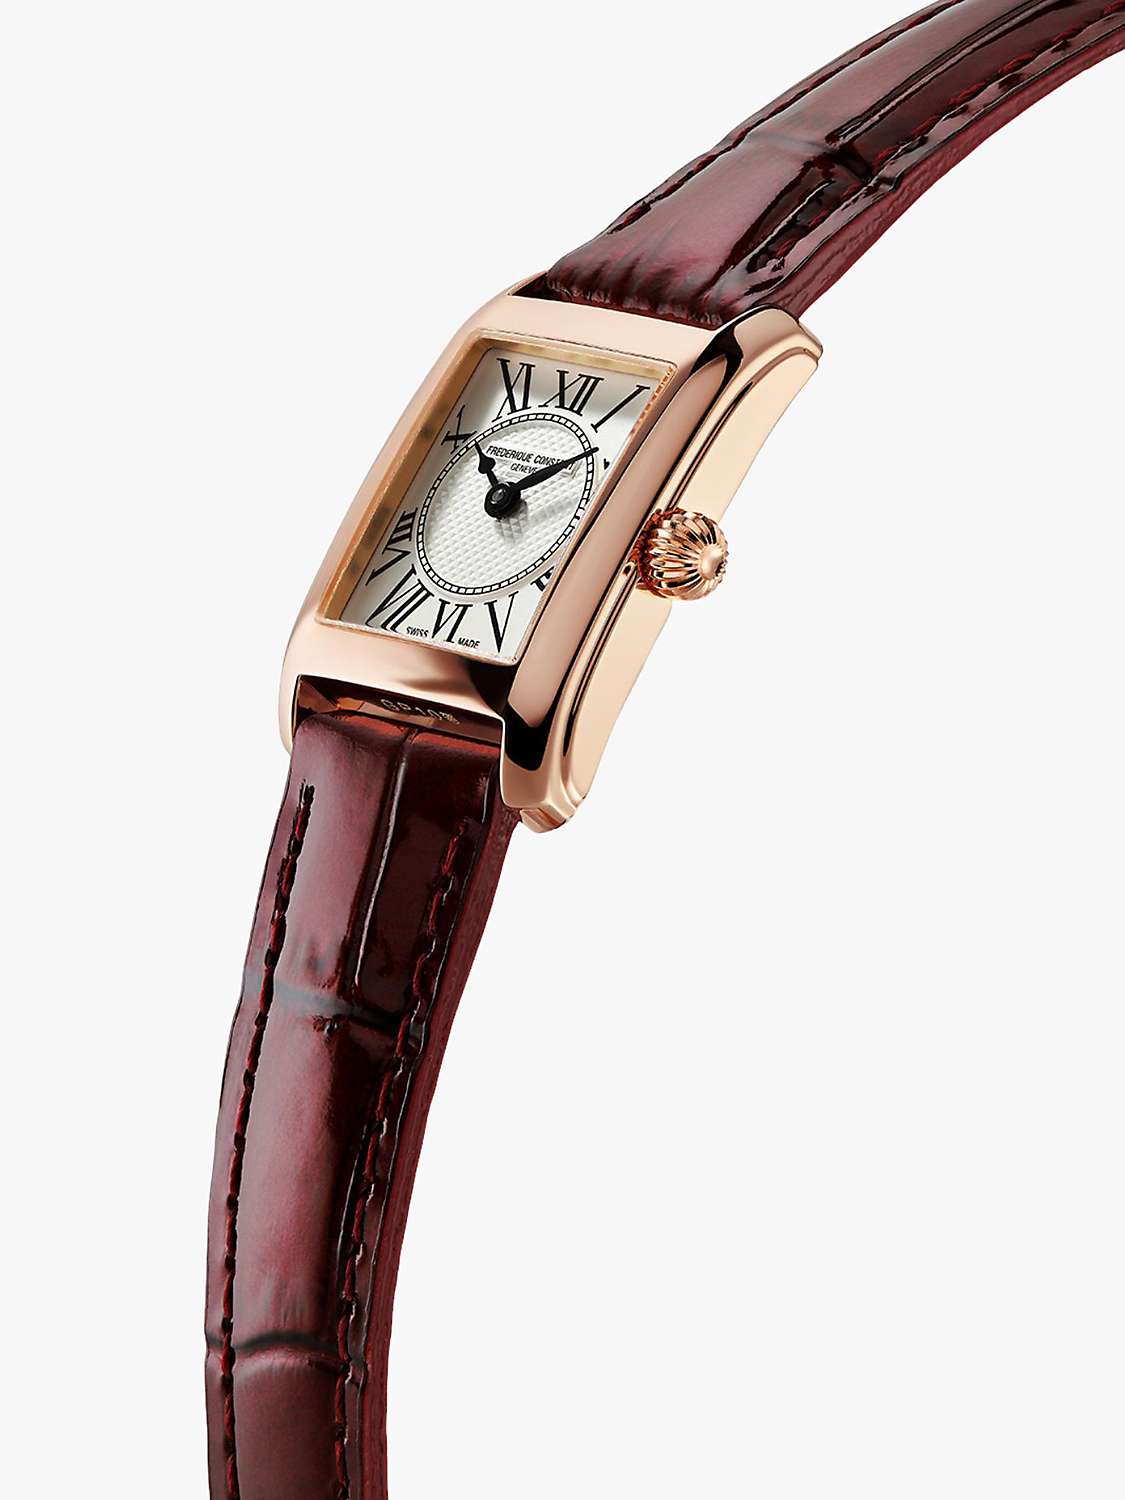 Buy Frederique Constant FC-200MC14 Women's Carrée Leather Strap Watch, Red/White Online at johnlewis.com